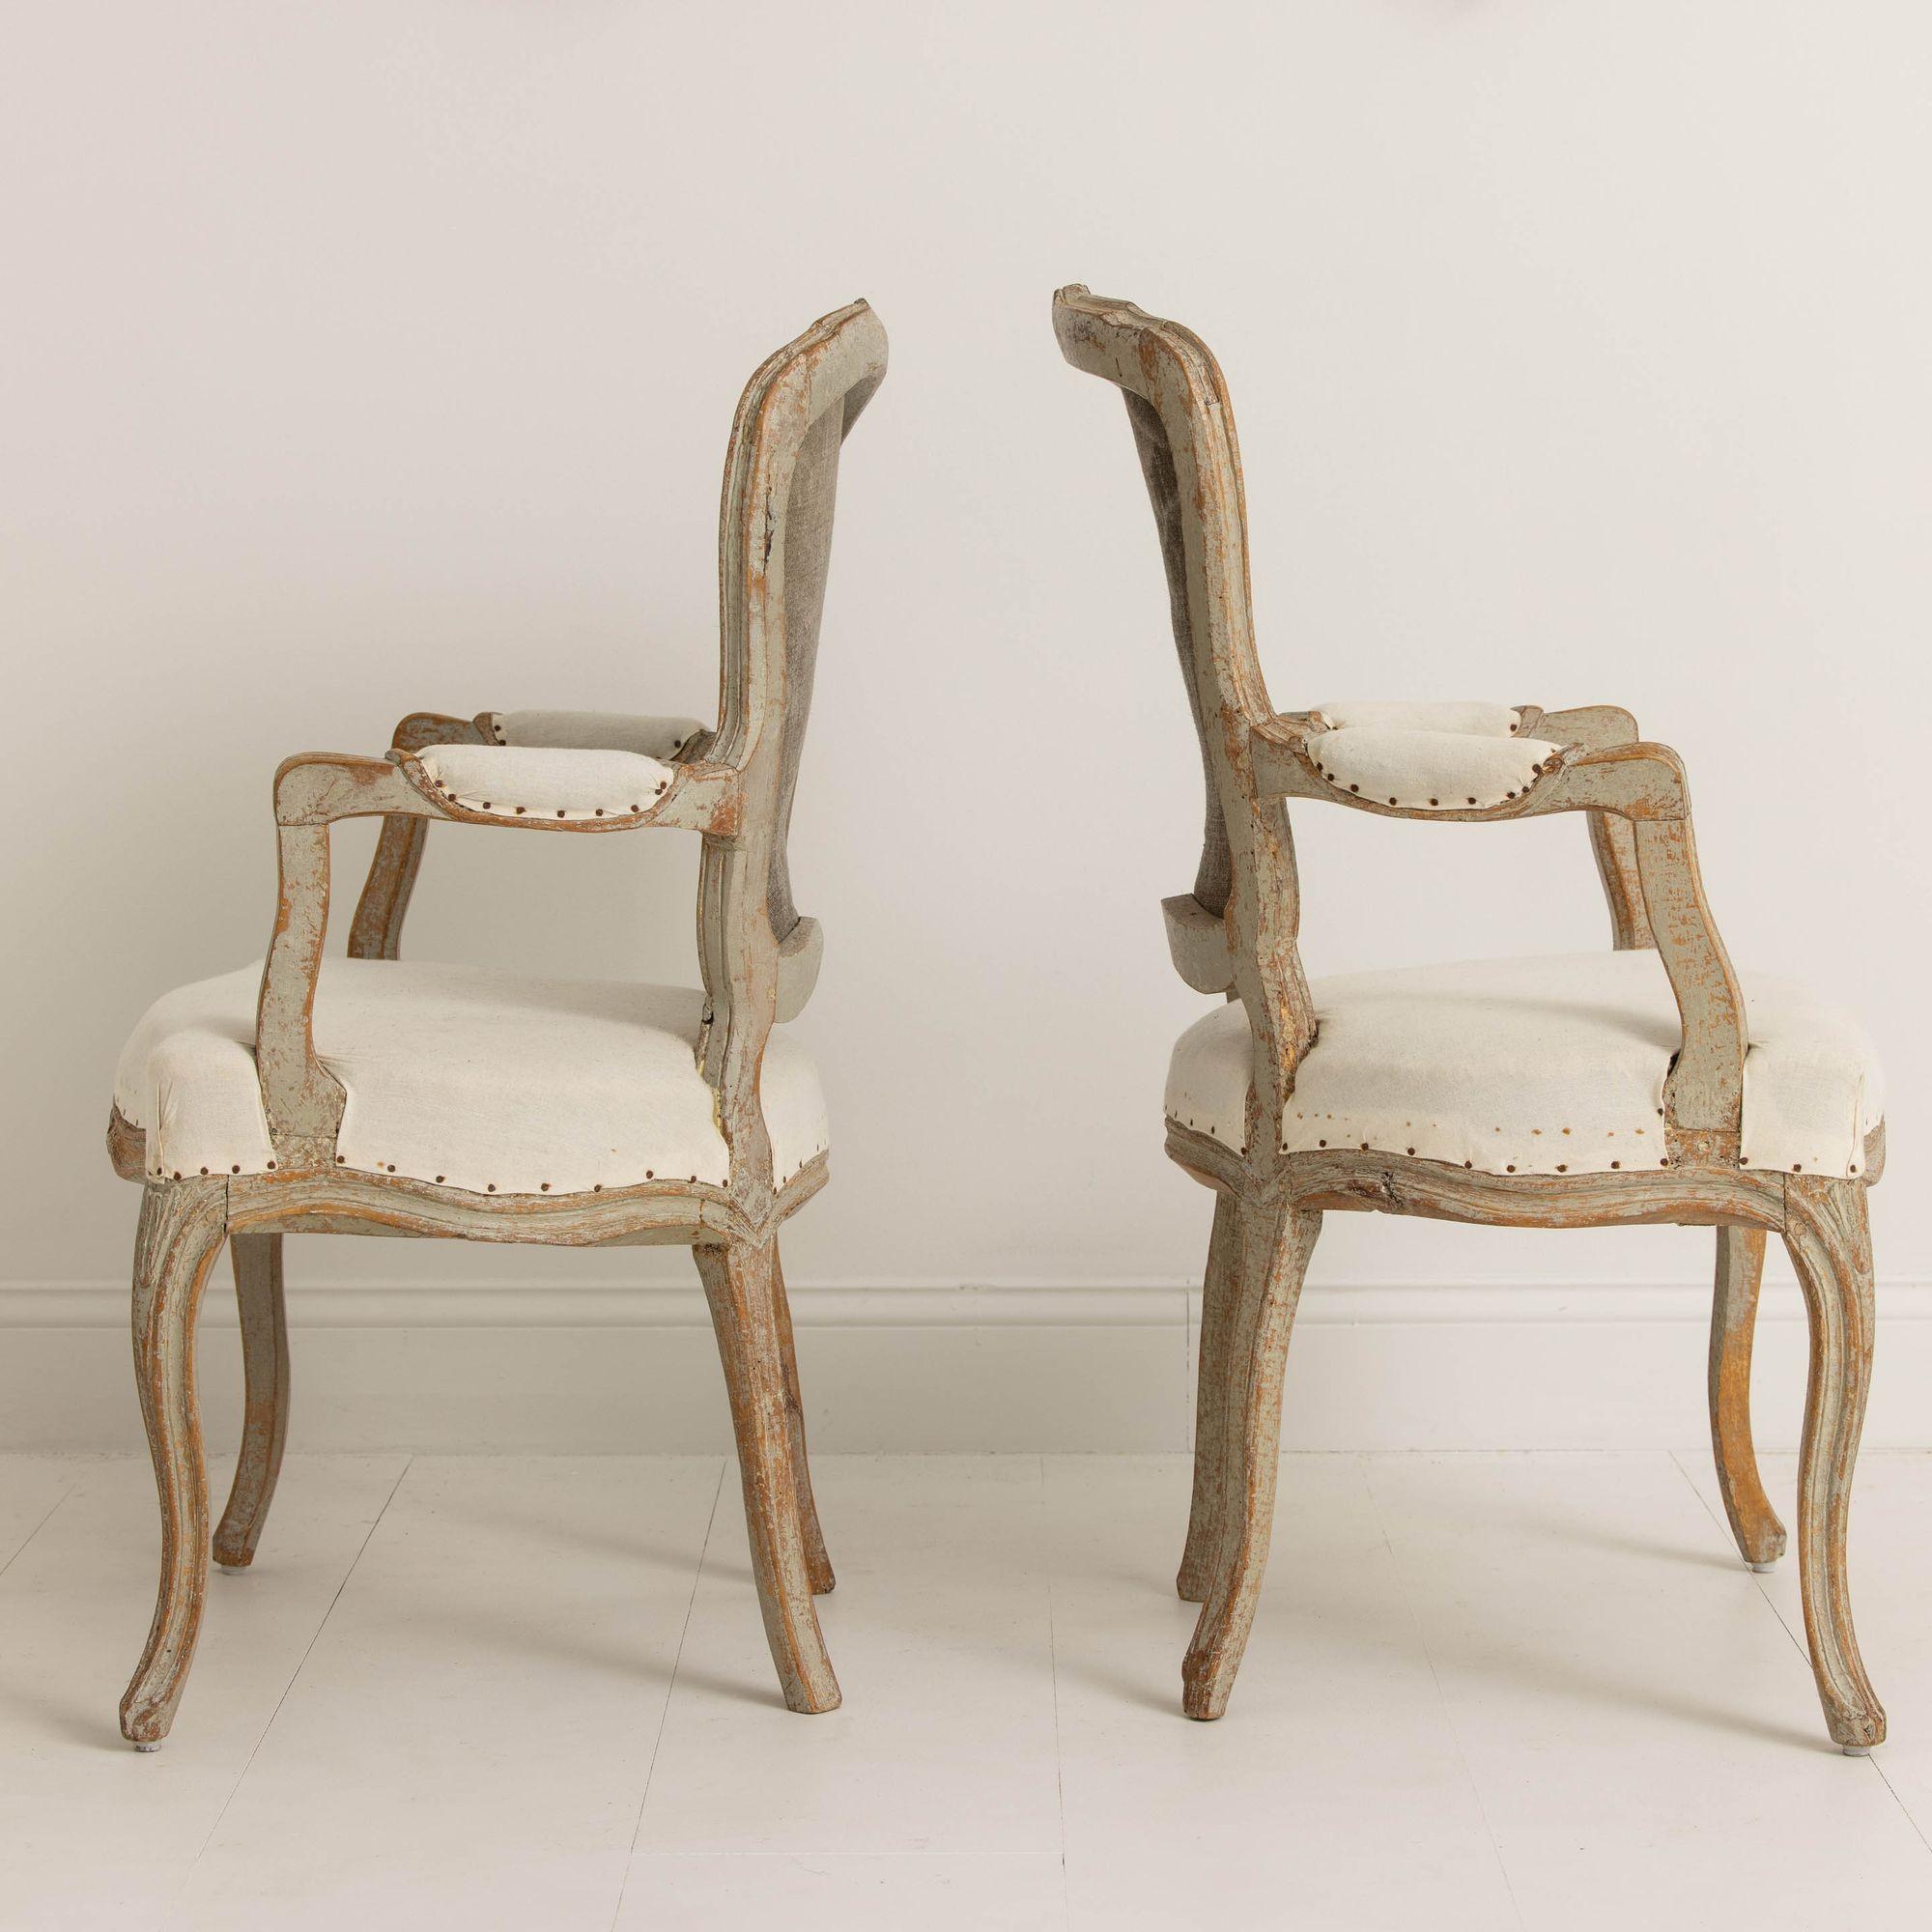 Pair of 18th c. Swedish Rococo Period Armchairs in Original Paint  For Sale 8